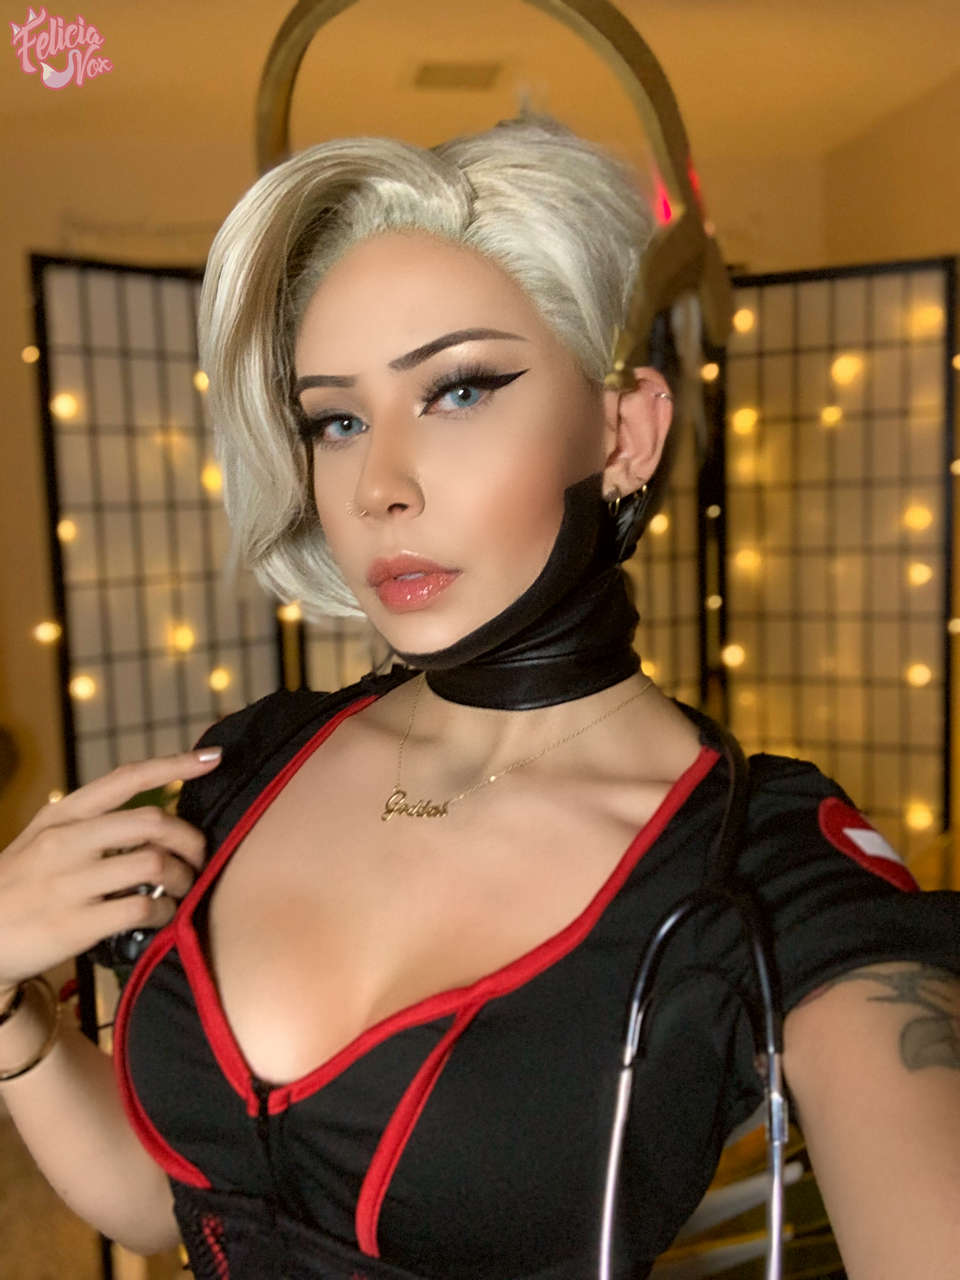 Mercy In Dark Nurse Outfit From Overwatch By Felicia Vo